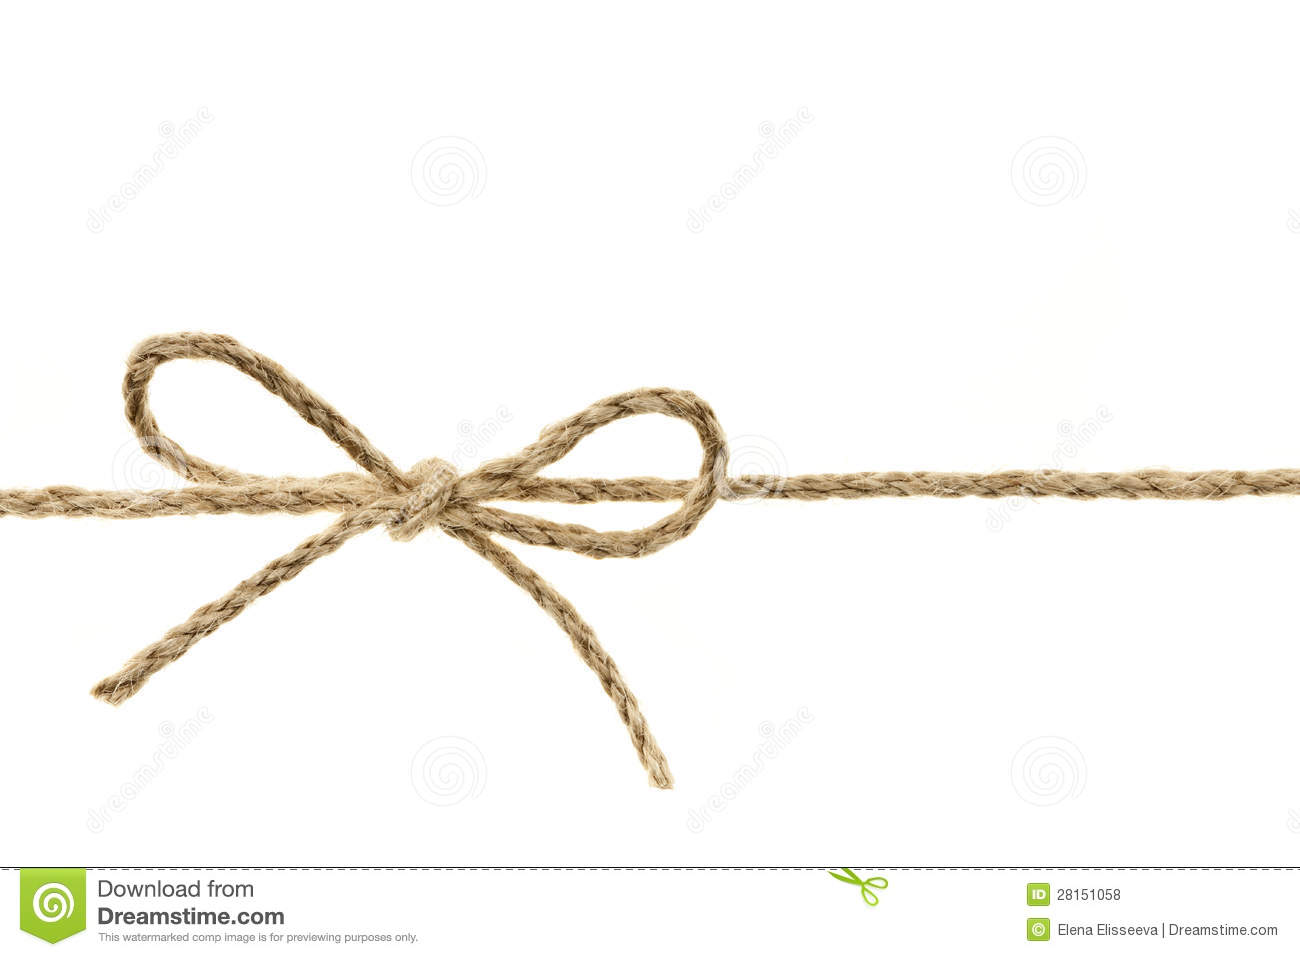 Closeup Of Braided Twine Tied In A Bow Knot Isolated On White